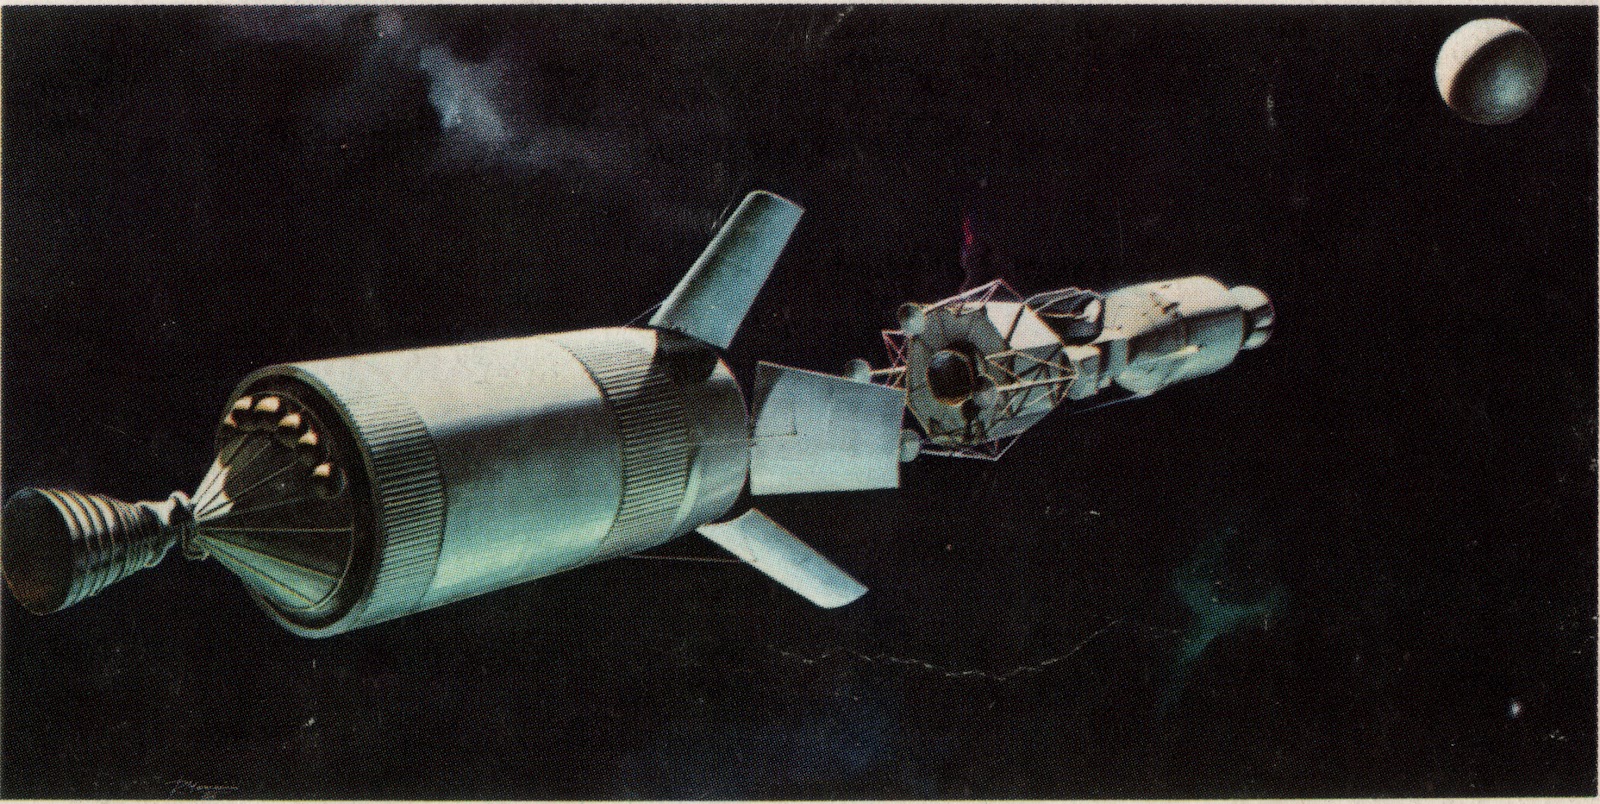 Apollo Spacecraft Separation Niy Minutes Later The